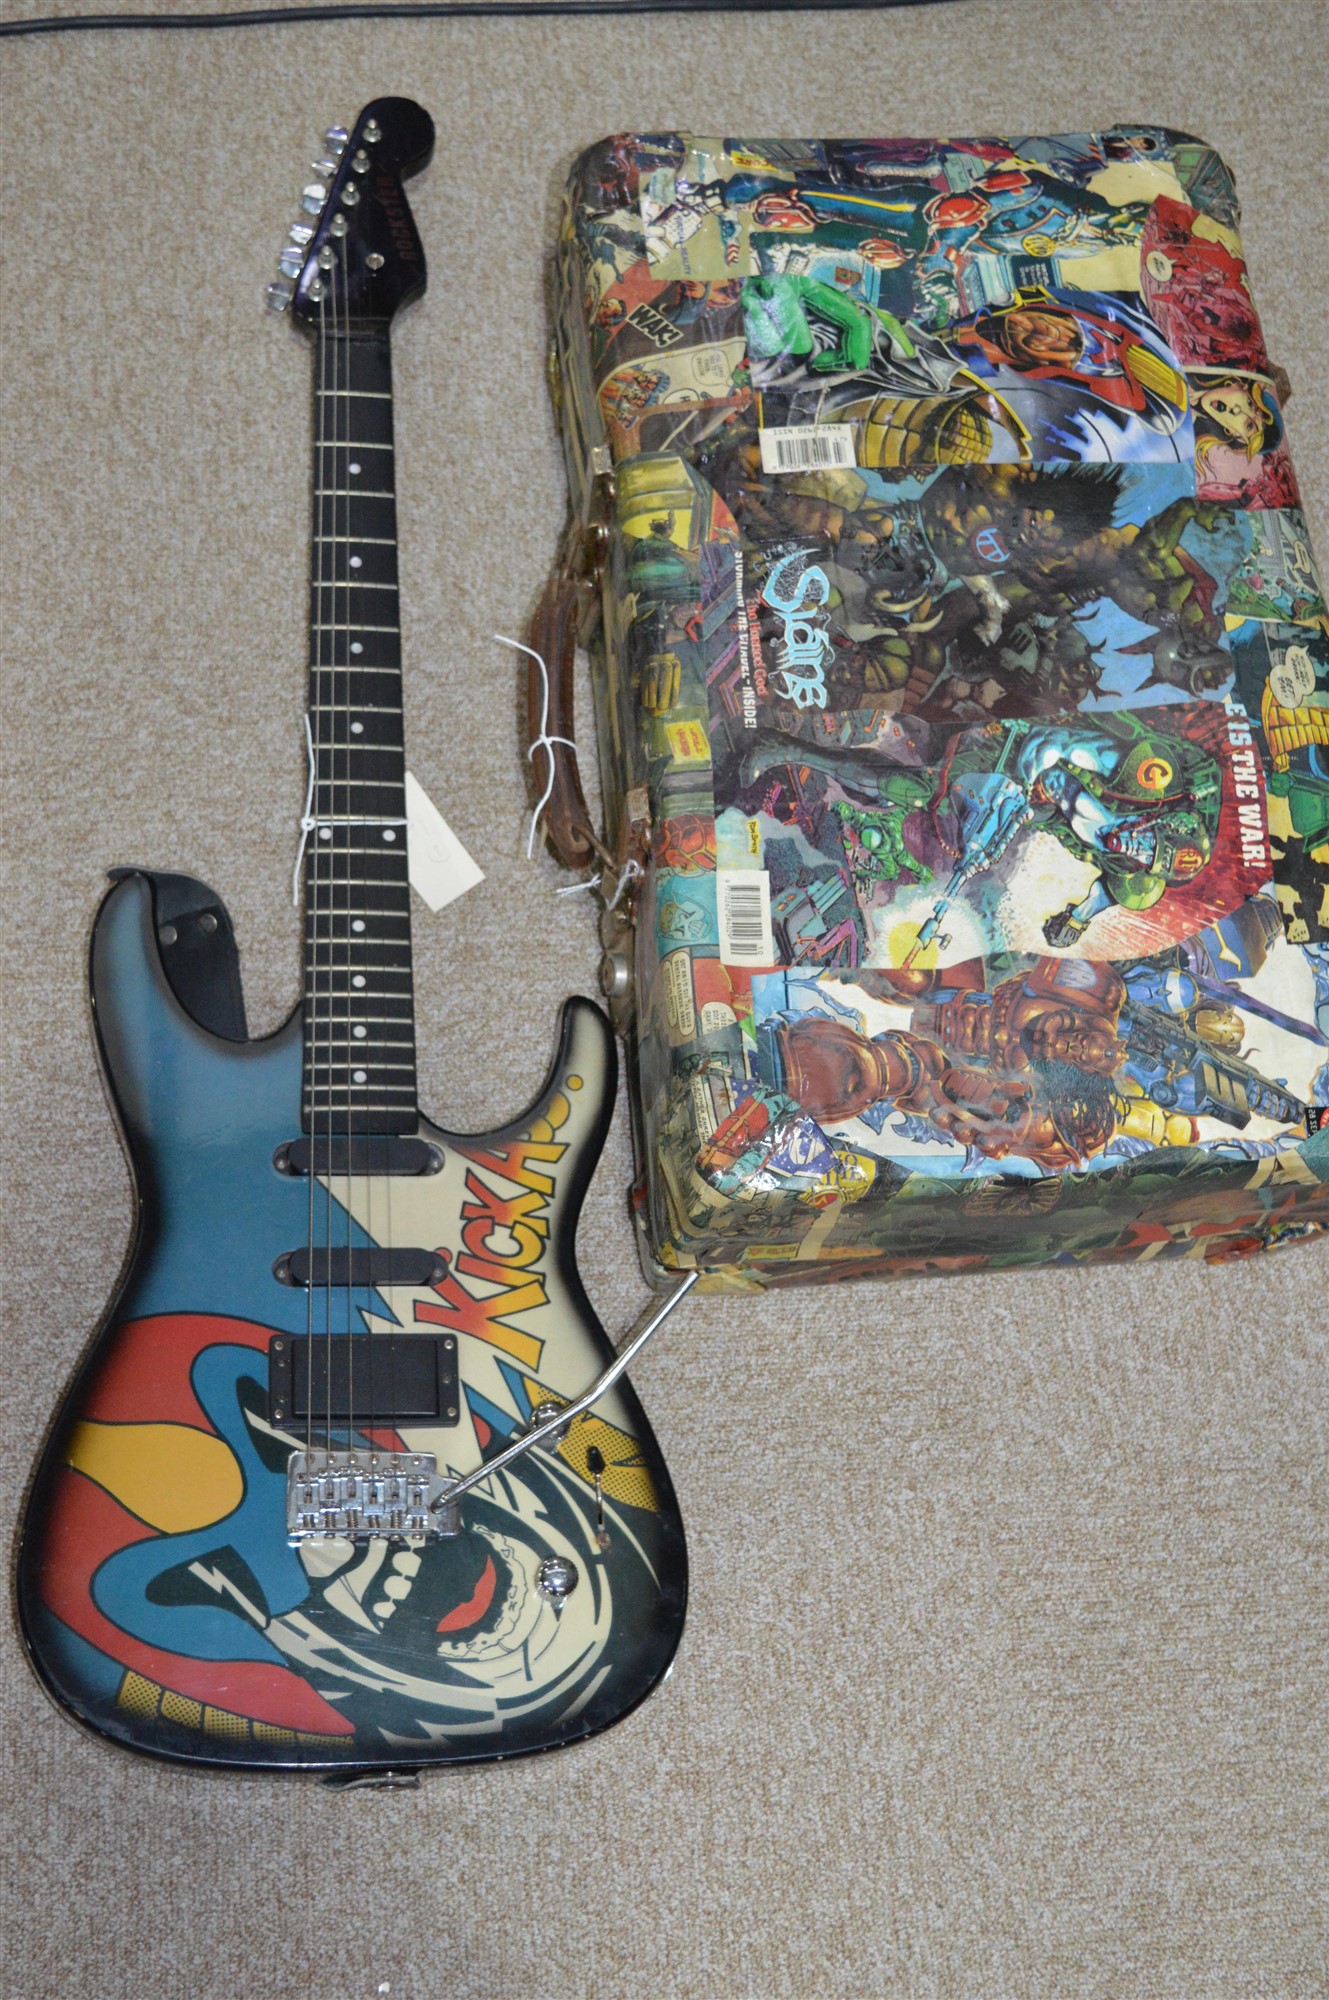 Guitar and case